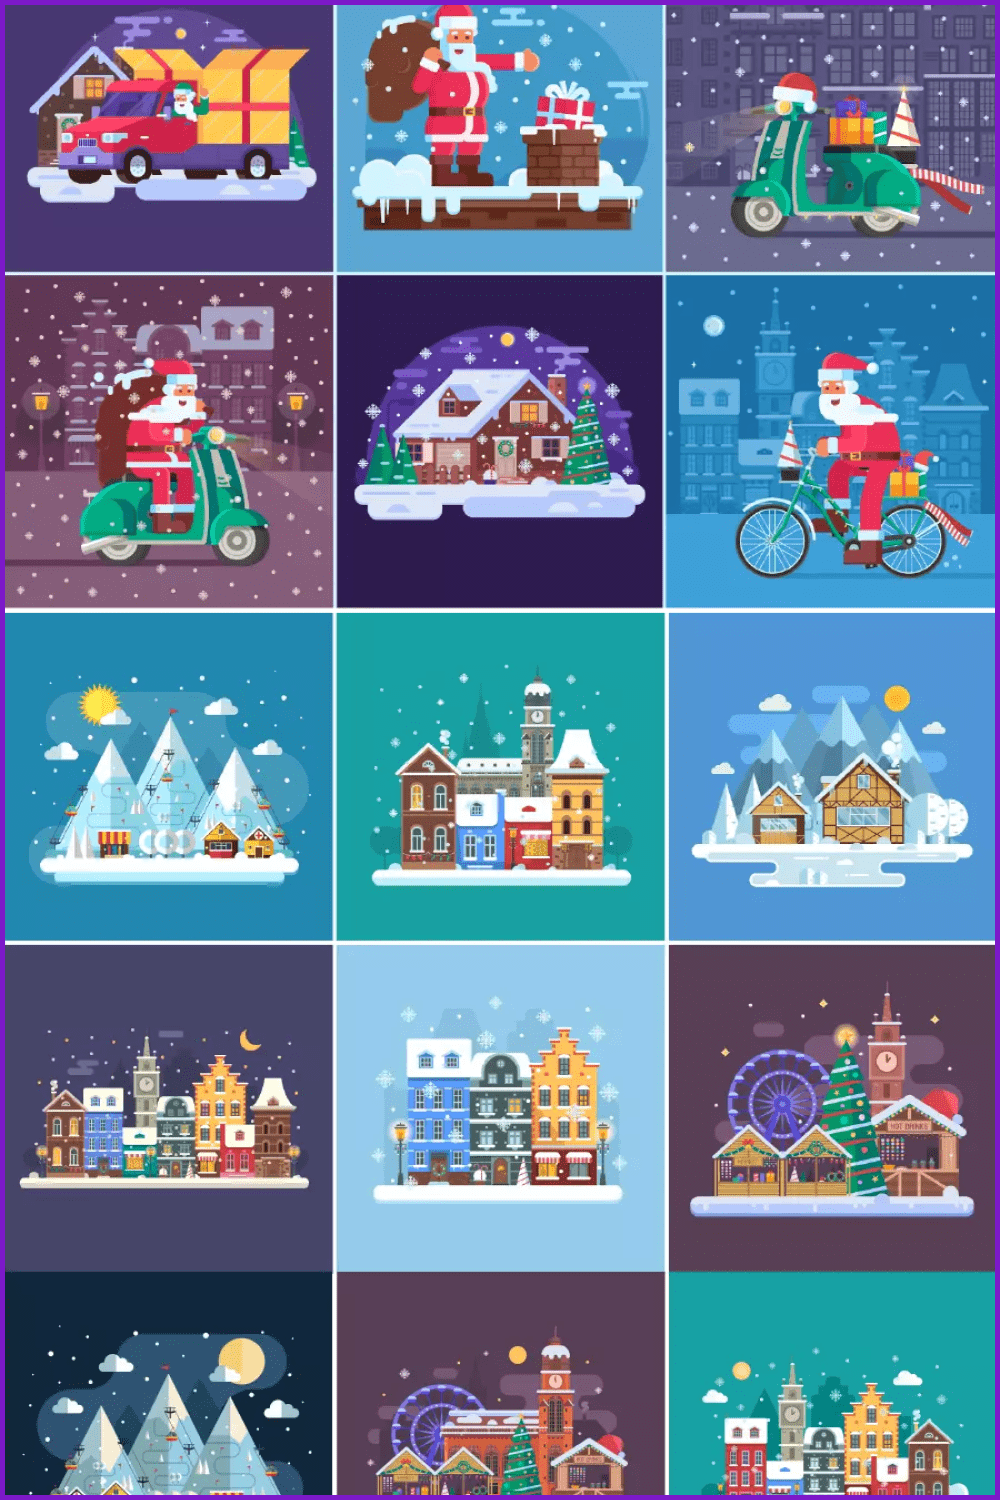 Collage of drawn Christmas illustrations with houses and Santa Claus.